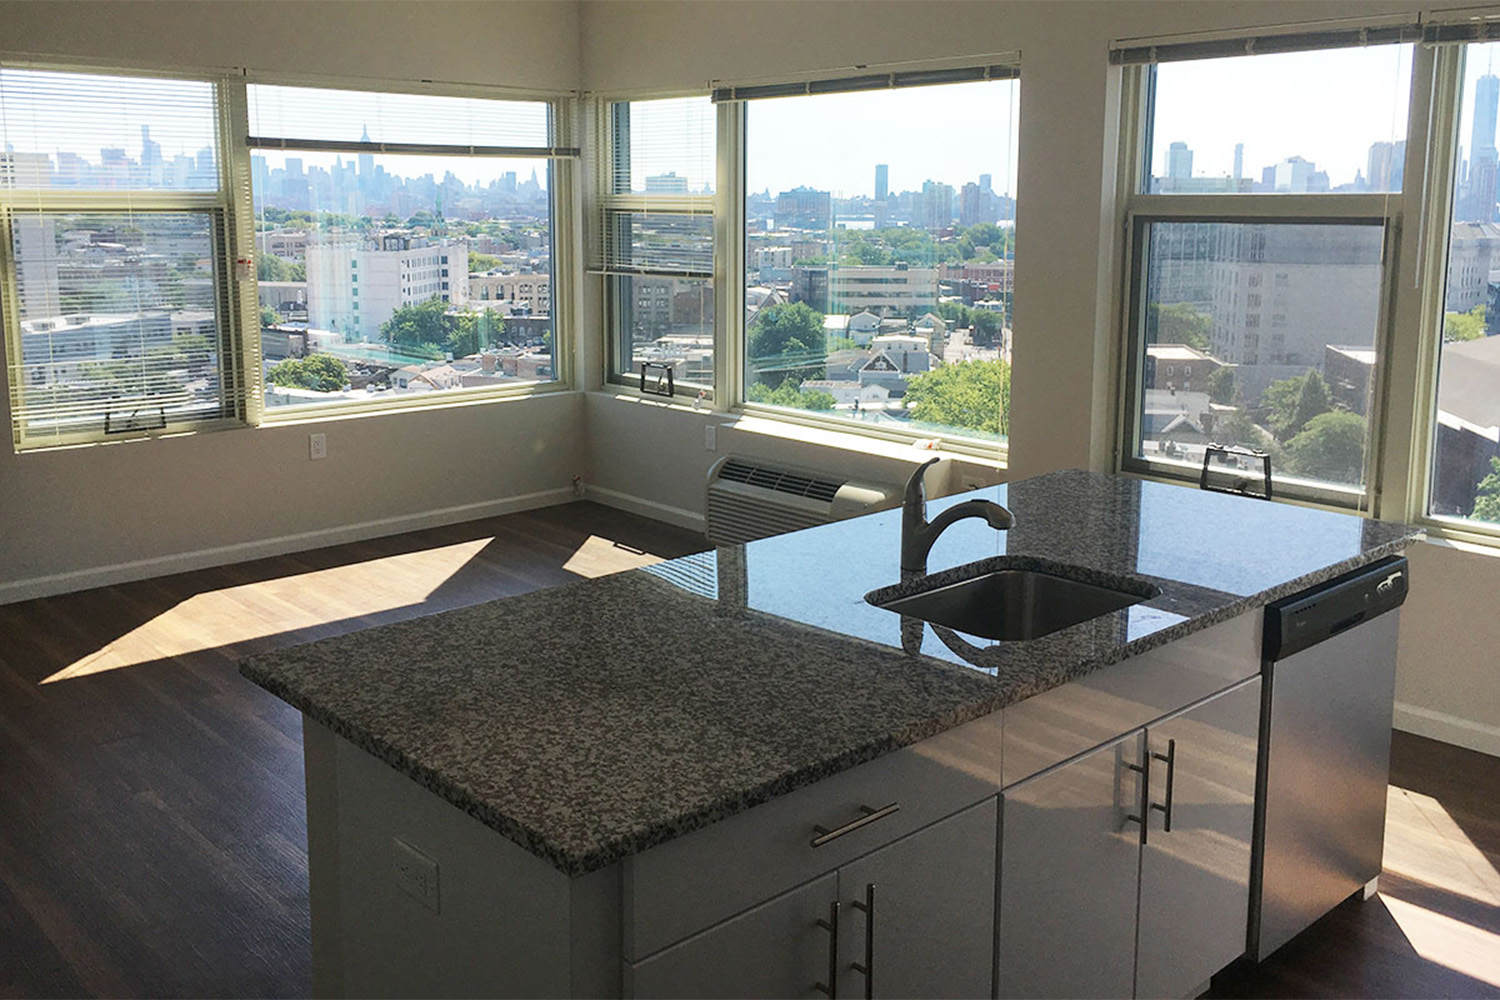 Kitchen with window view of cityscape